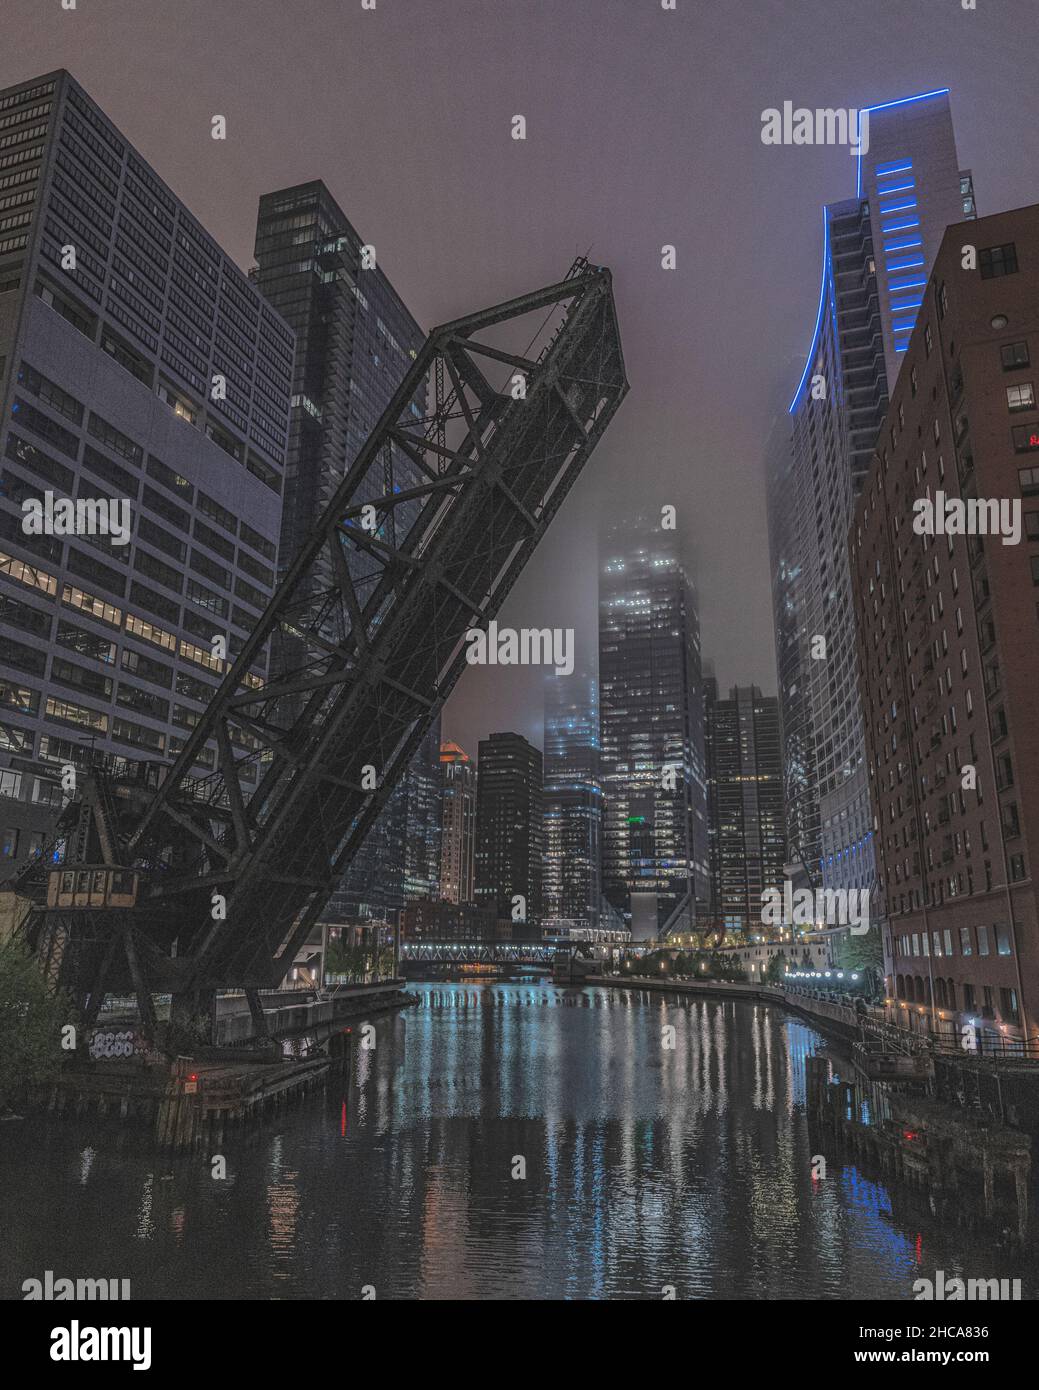 Vertical shot of the Kinzie Street railroad bridge locked in the raised position at night Stock Photo